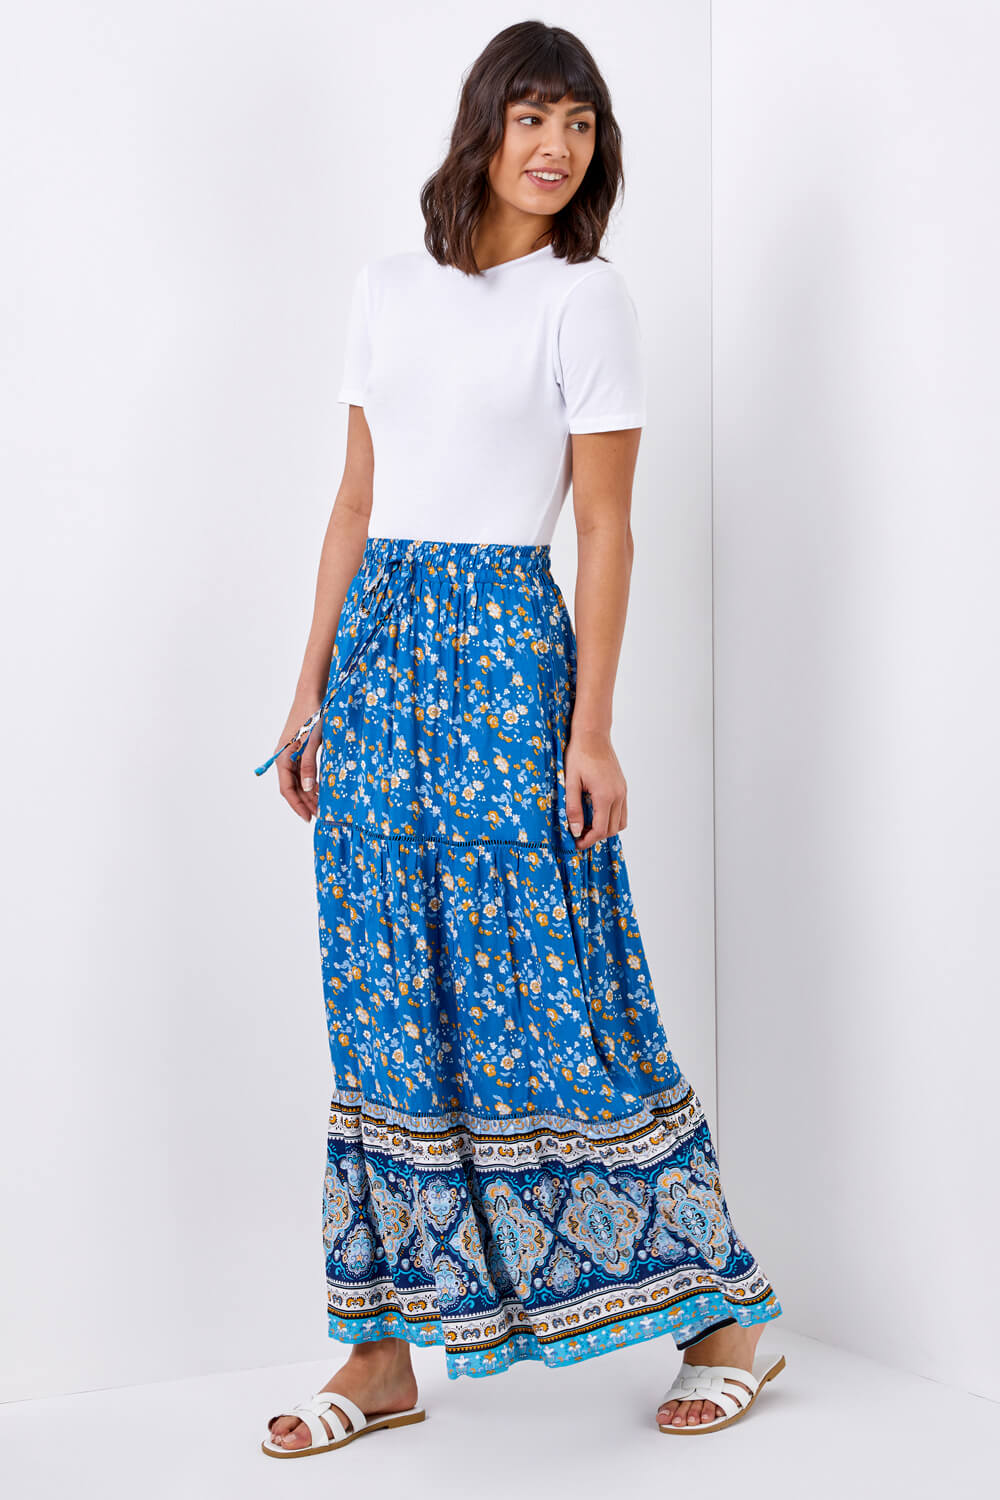 Blue Tiered Floral Print Maxi Skirt, Image 3 of 4